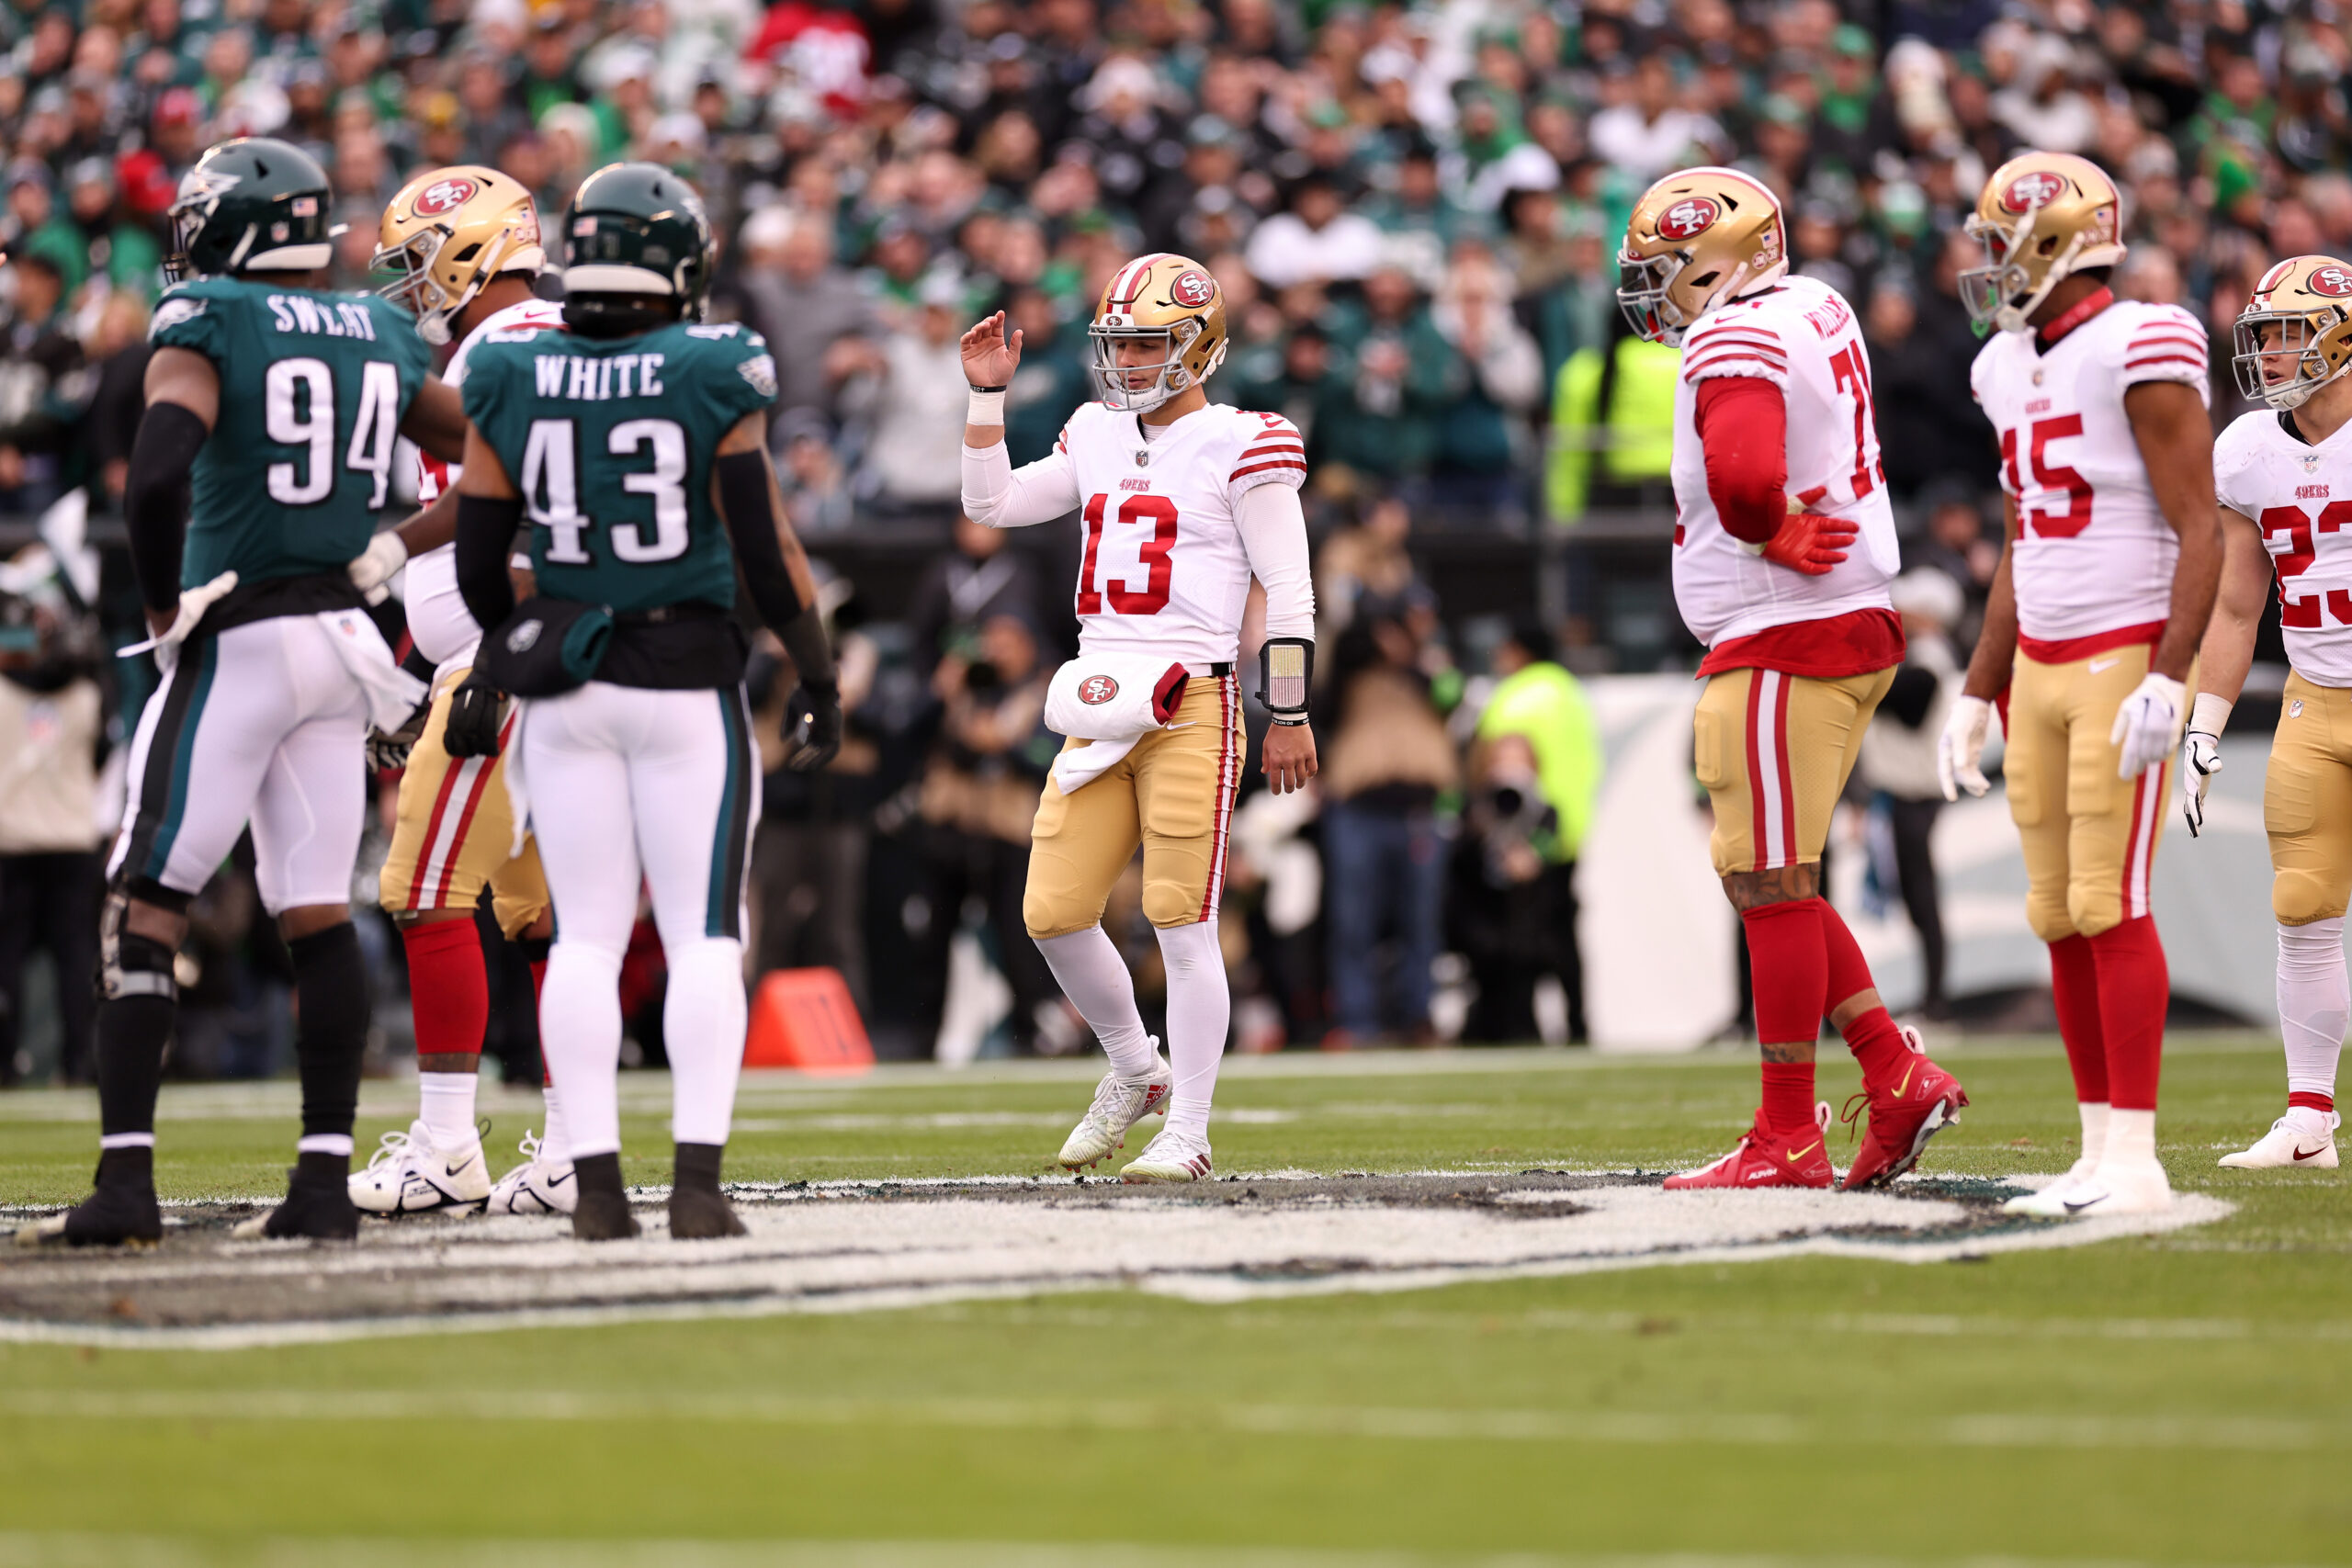 PHILADELPHIA, PENNSYLVANIA - JANUARY 29: Brock Purdy #13 of the San Francisco 49ers reacts against the Philadelphia Eagles during the first quarter in the NFC Championship Game at Lincoln Financial Field on January 29, 2023 in Philadelphia, Pennsylvania. (Photo by Tim Nwachukwu/Getty Images)